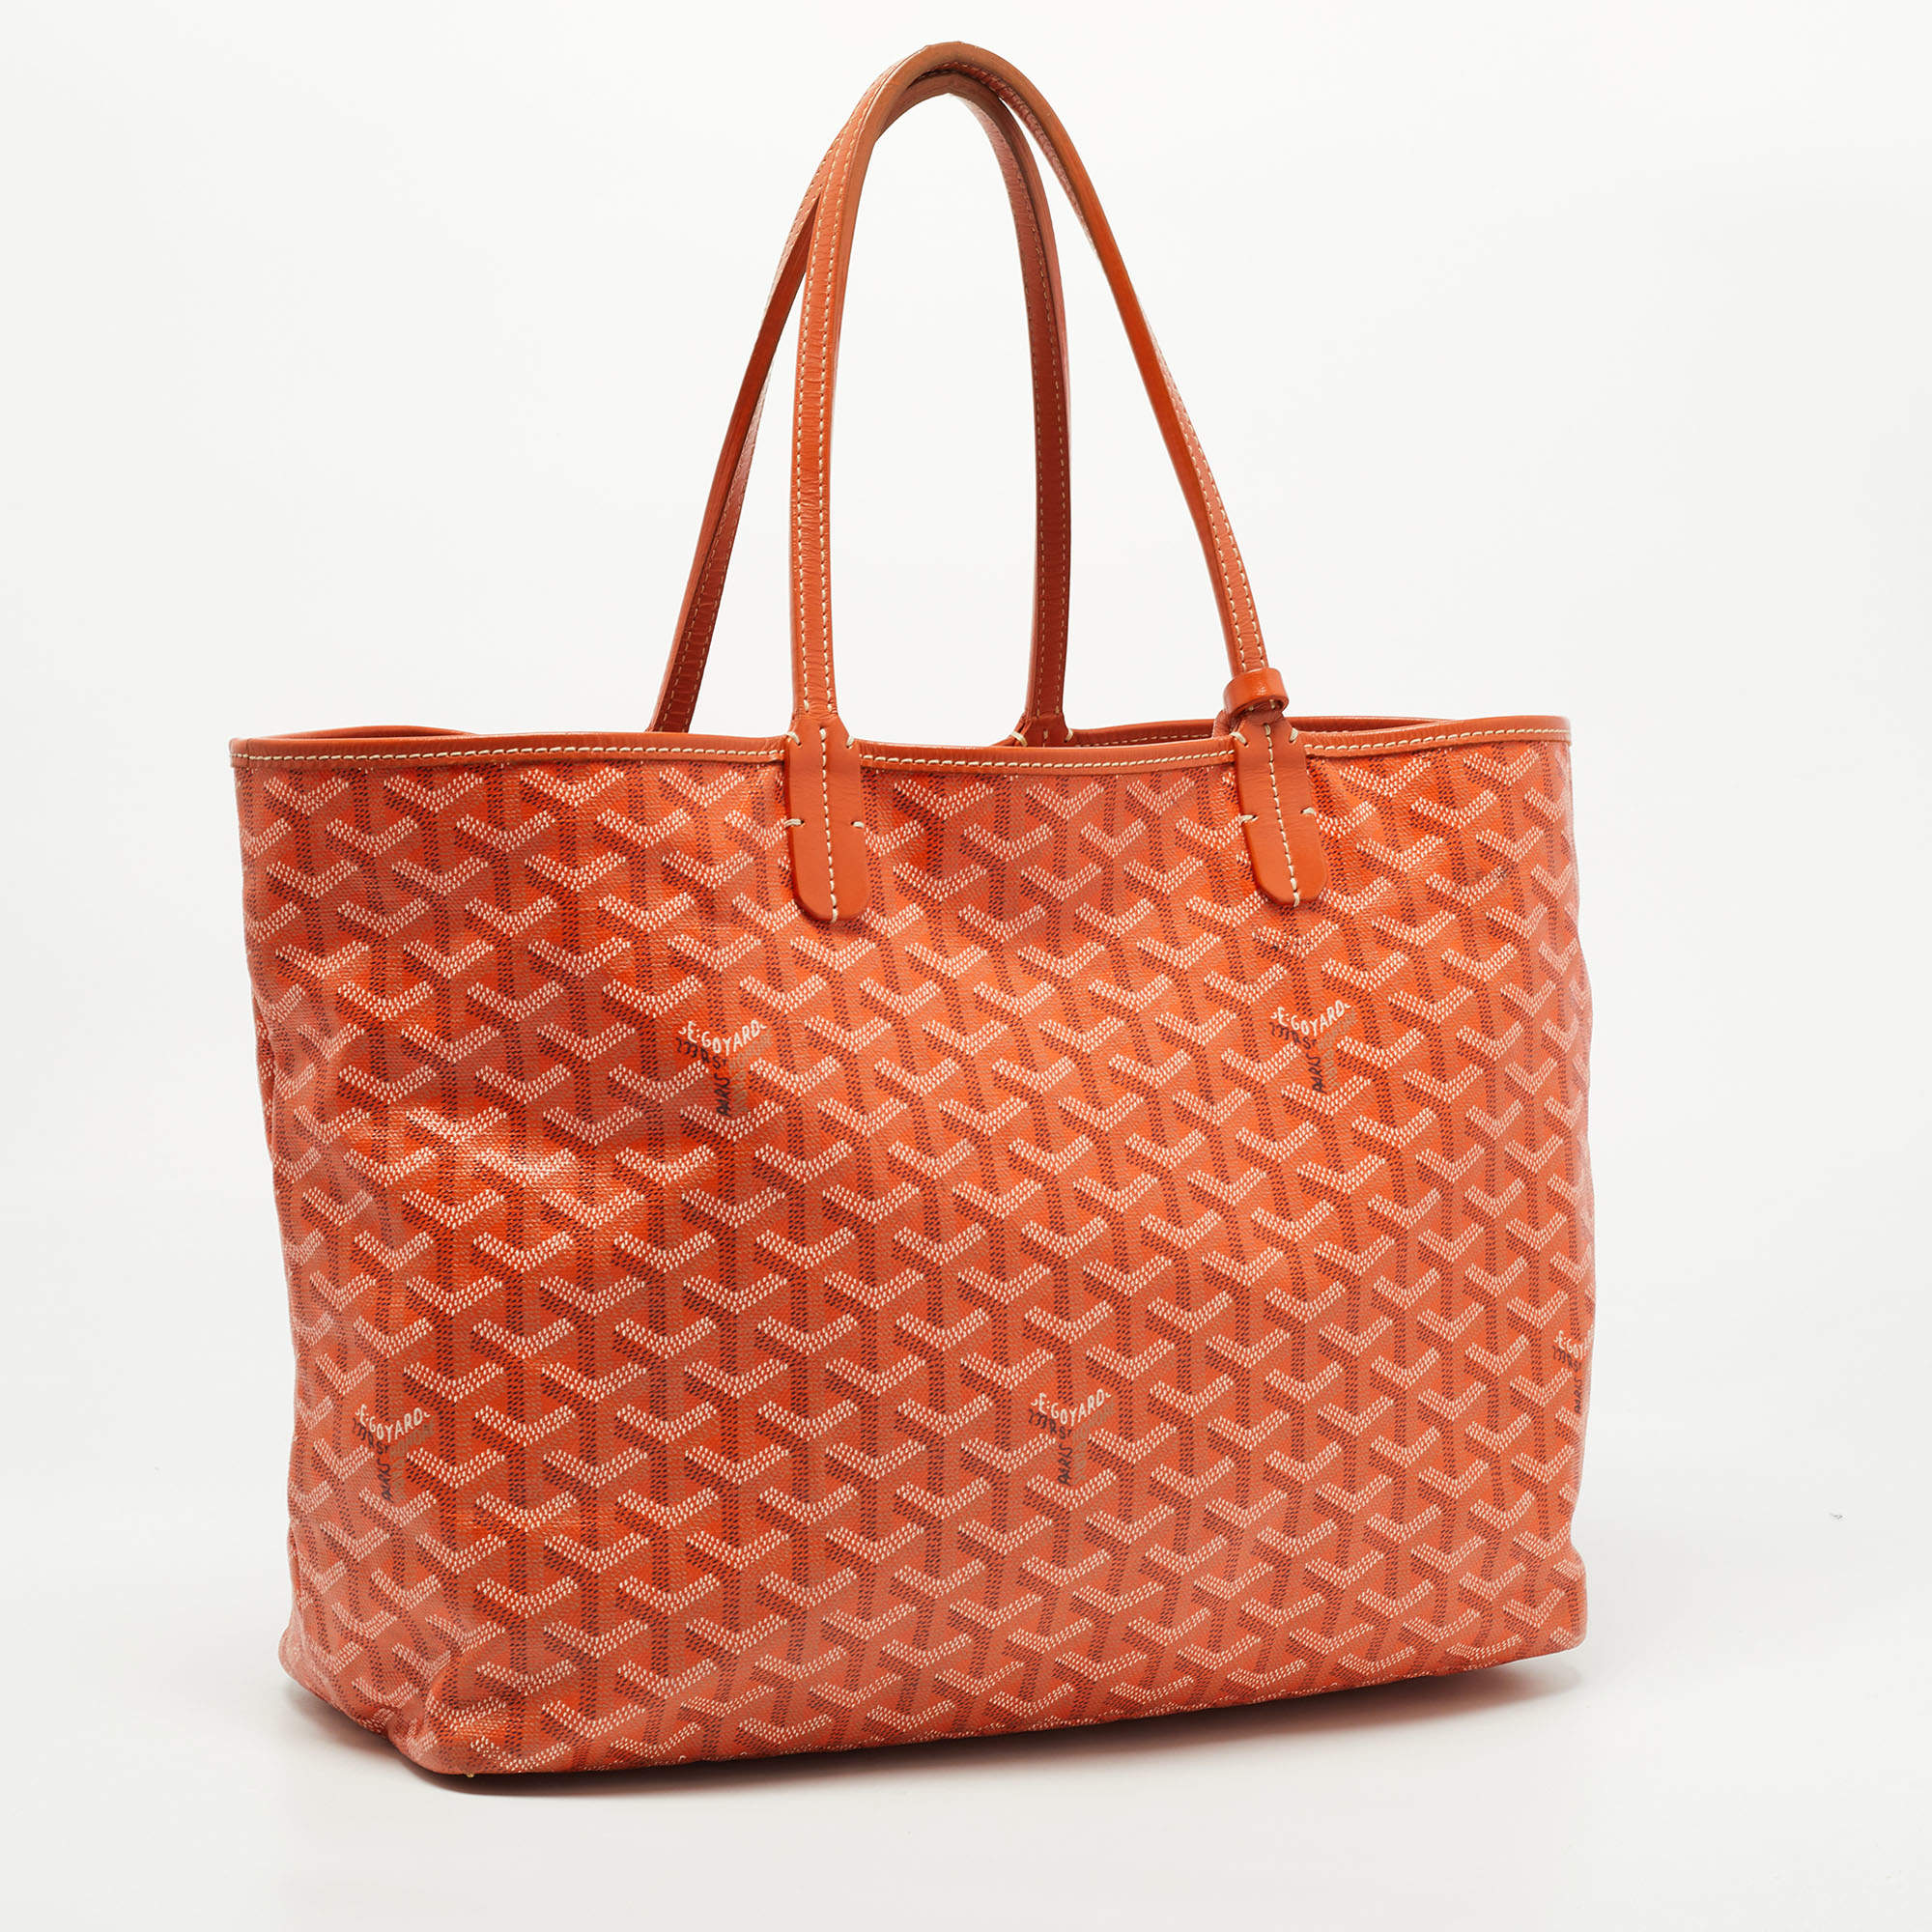 Goyard Saint Louis PM Tote - New in Dust Bag - The Consignment Cafe